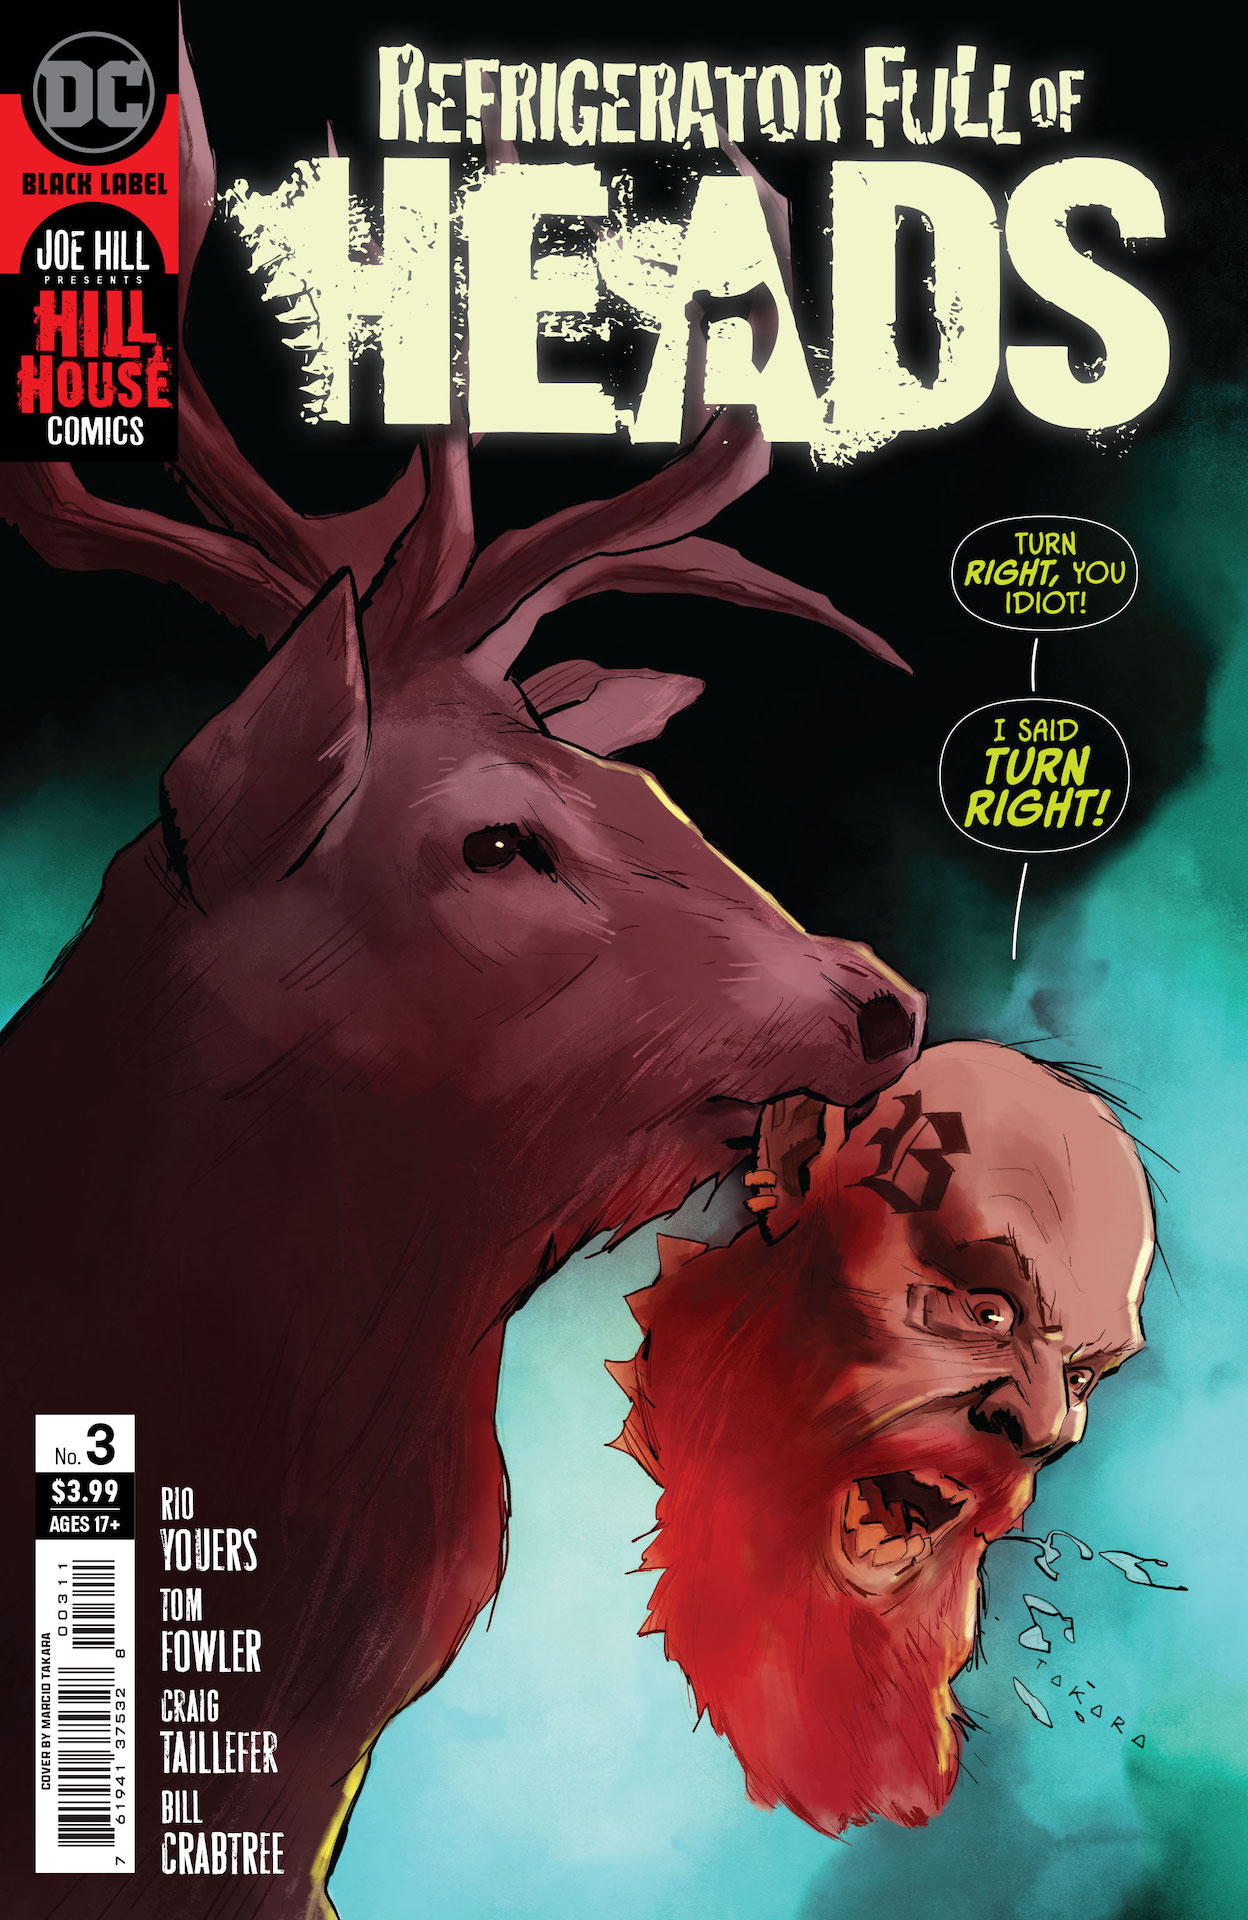 DC Preview: Refrigerator Full Of Heads #3